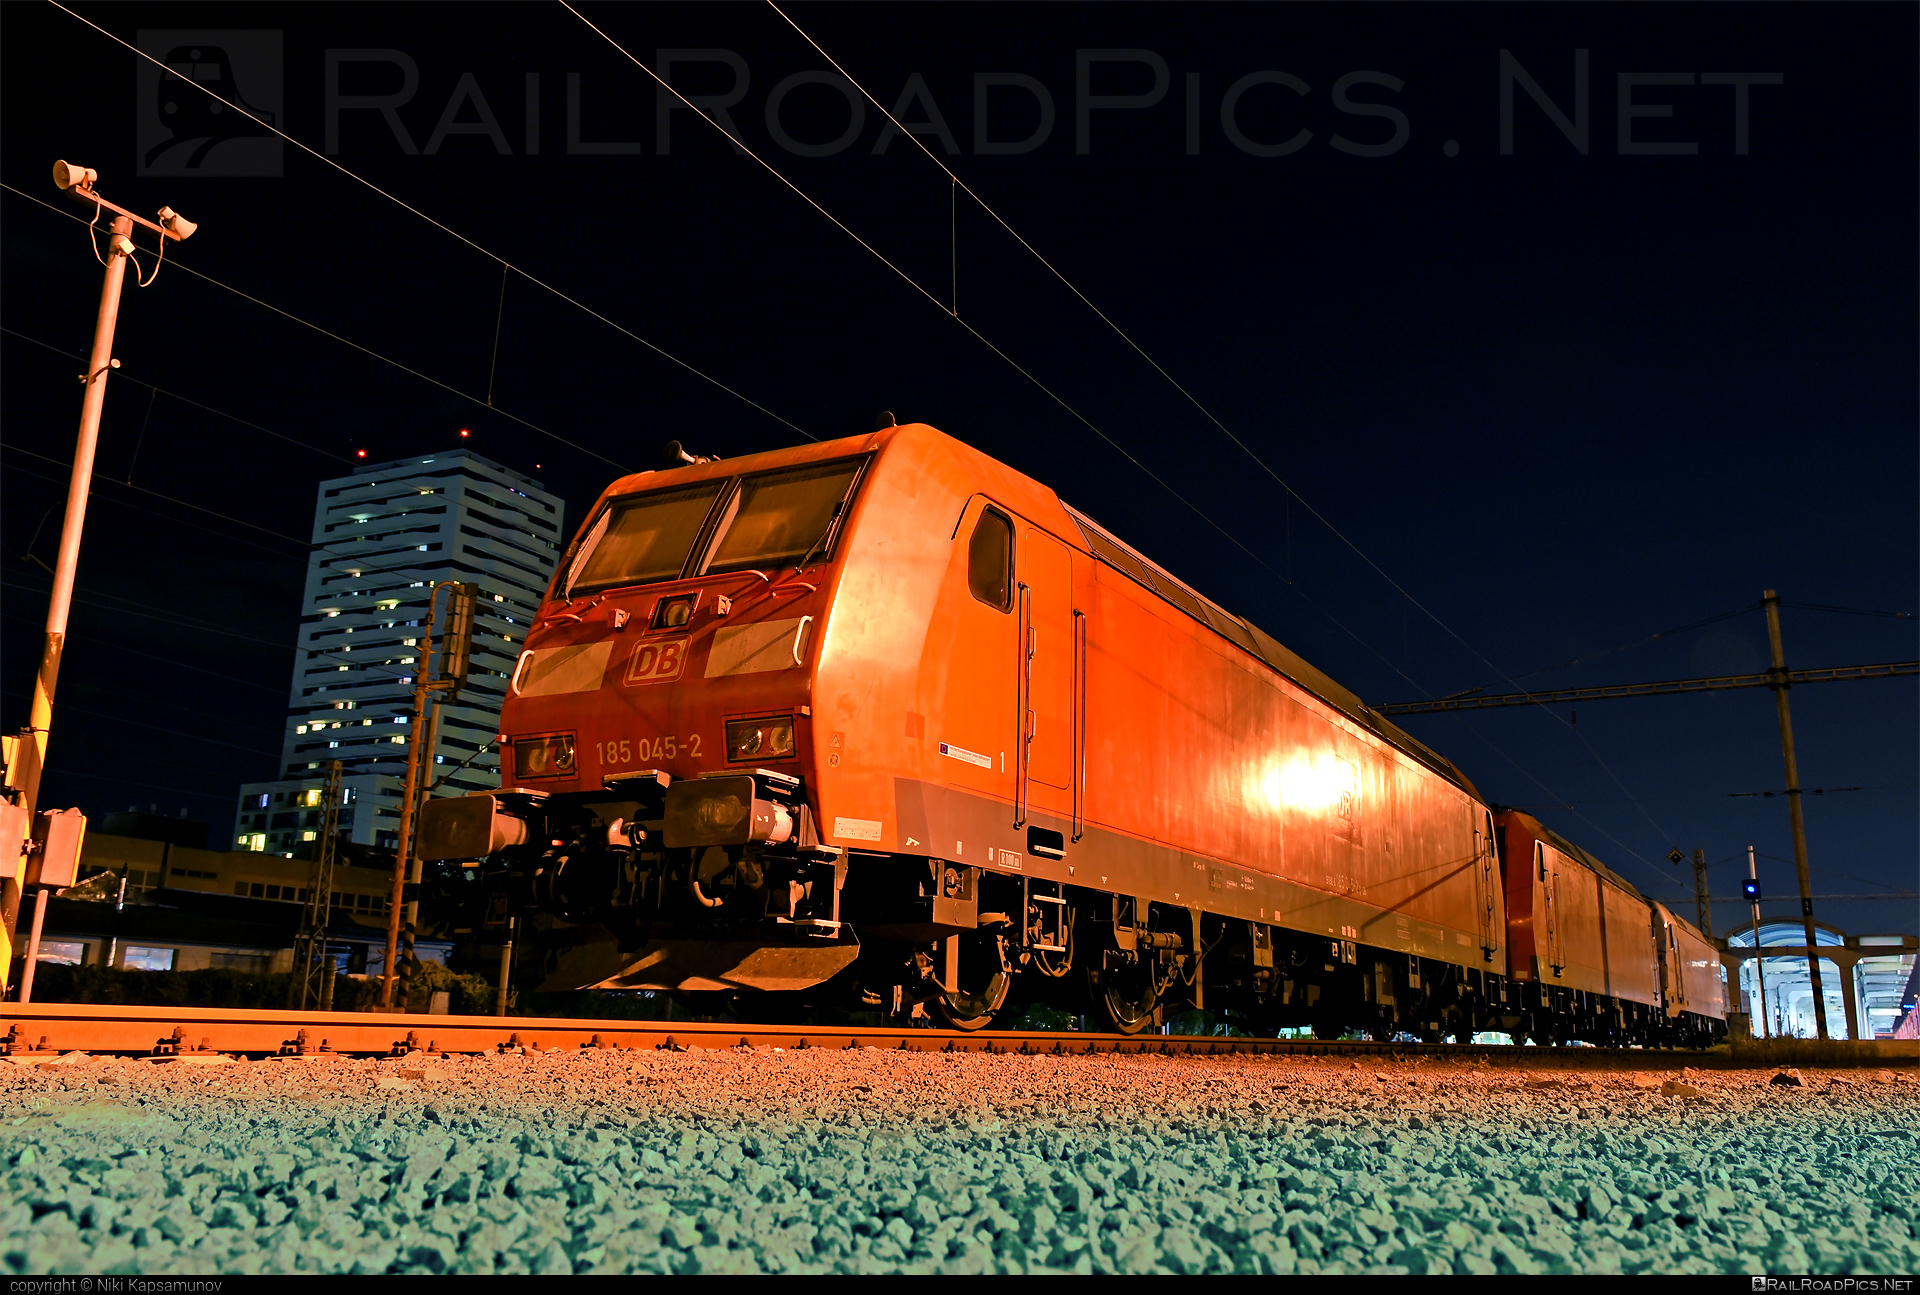 Bombardier TRAXX F140 AC1 - 185 045-2 operated by DB Cargo AG #bombardier #bombardiertraxx #db #dbcargo #dbcargoag #deutschebahn #traxx #traxxf140 #traxxf140ac #traxxf140ac1